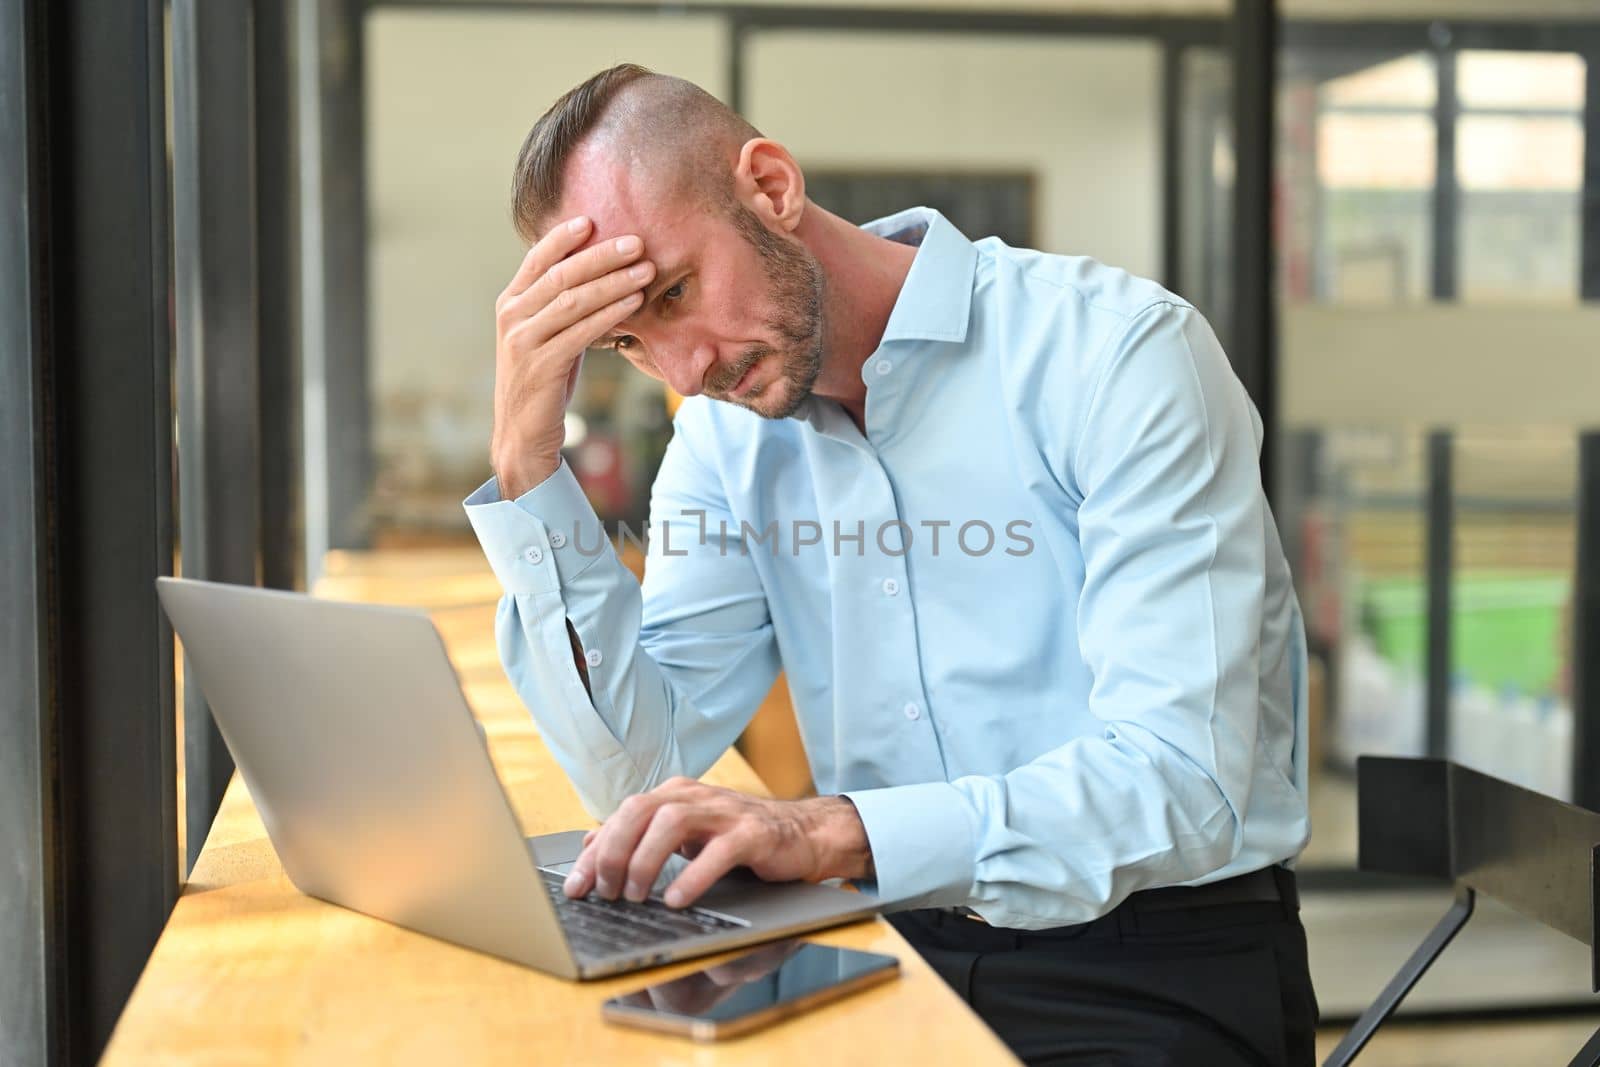 Overworked caucasian man office worker holding her head in hands, feeling distressed anxious with work deadline.